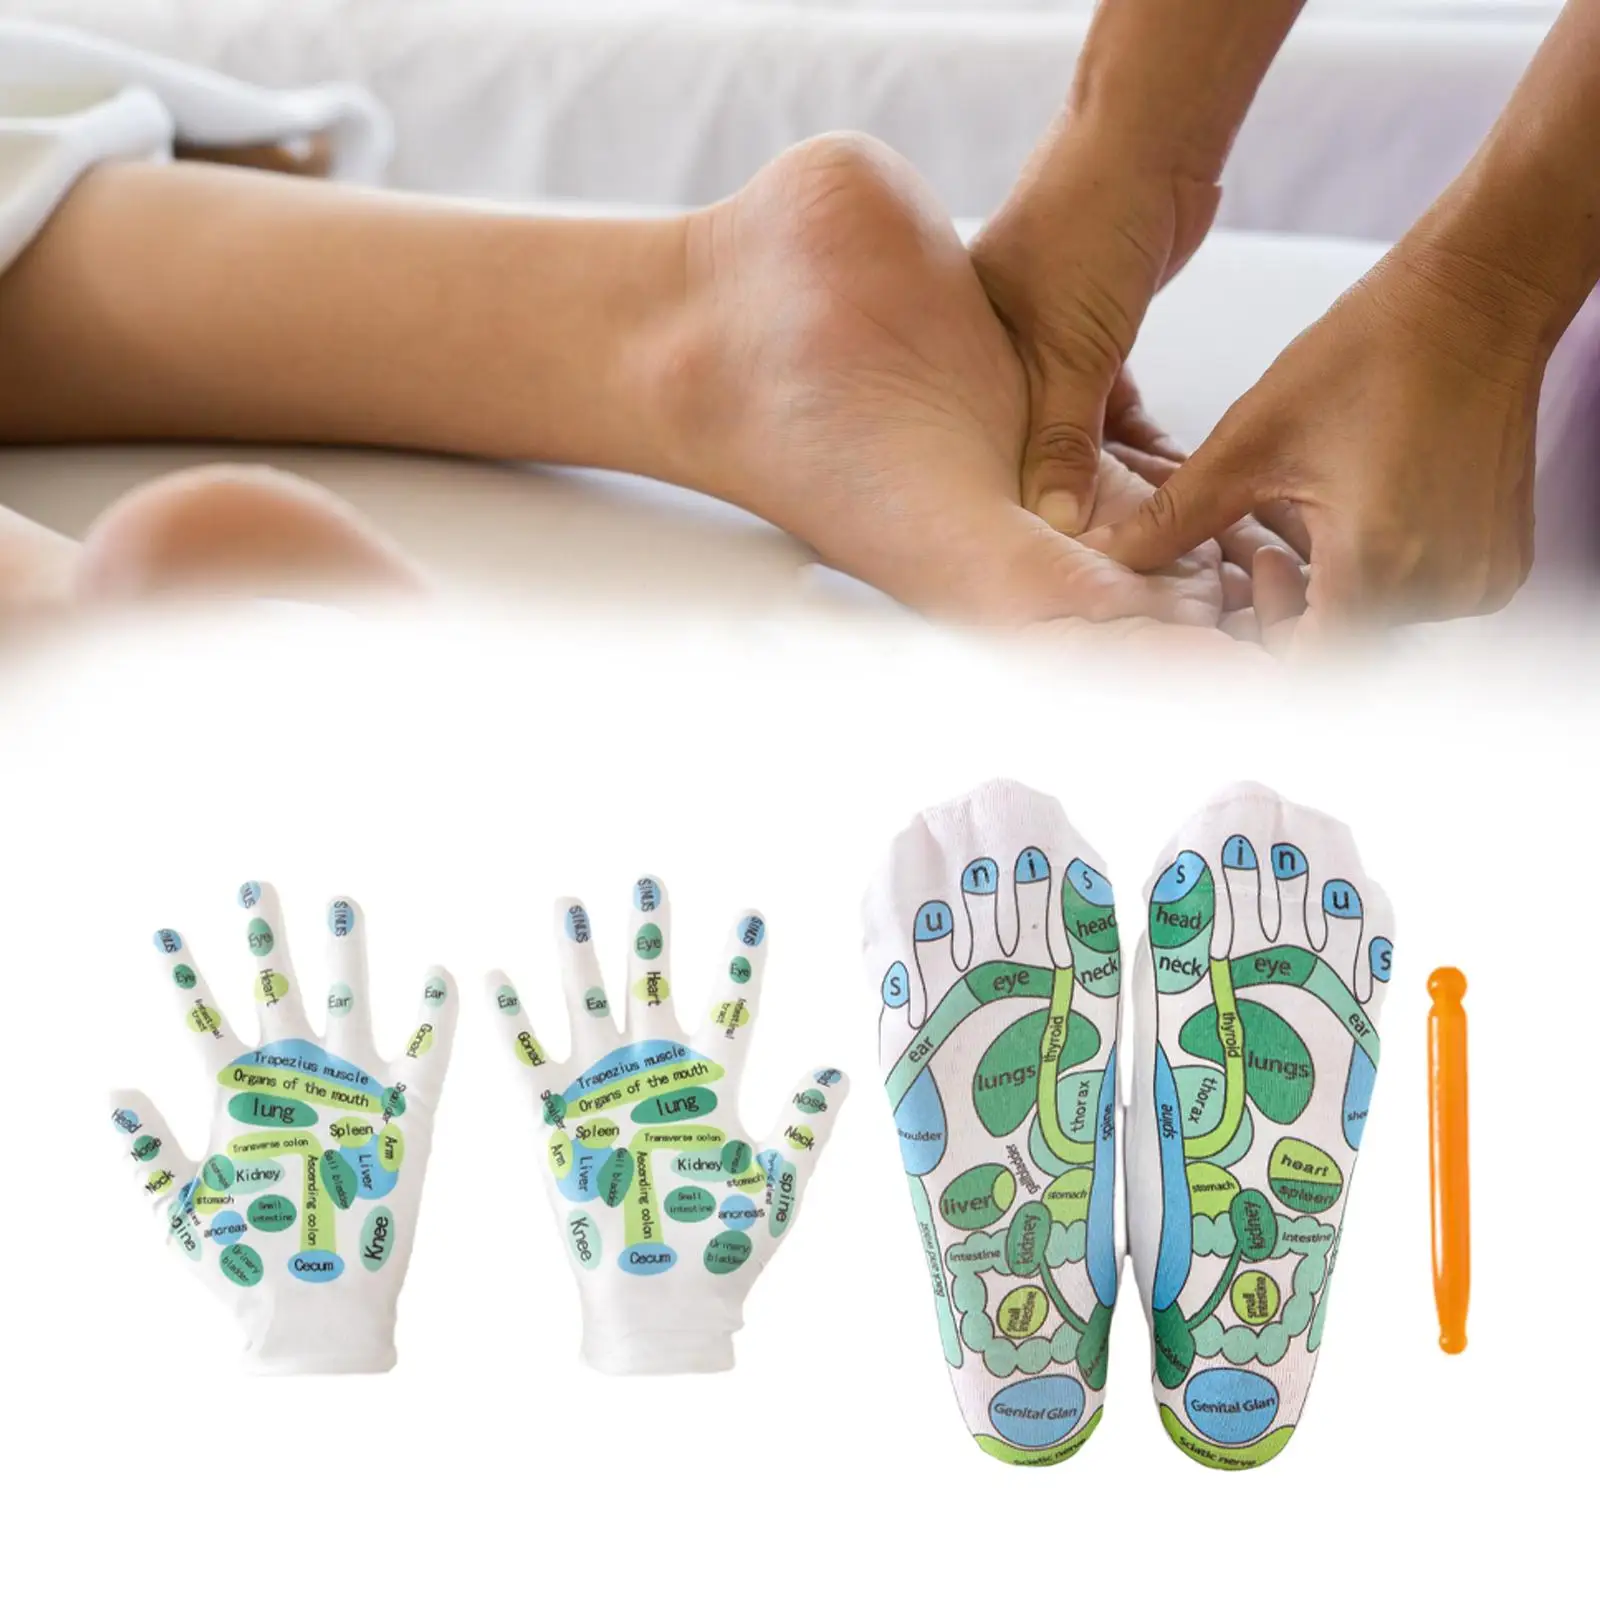 4x Hand and Foot Massage Set Casual Reflection Area with Massage Stick Hand SPA Reflexology Tools for Adults Men Women Beginner